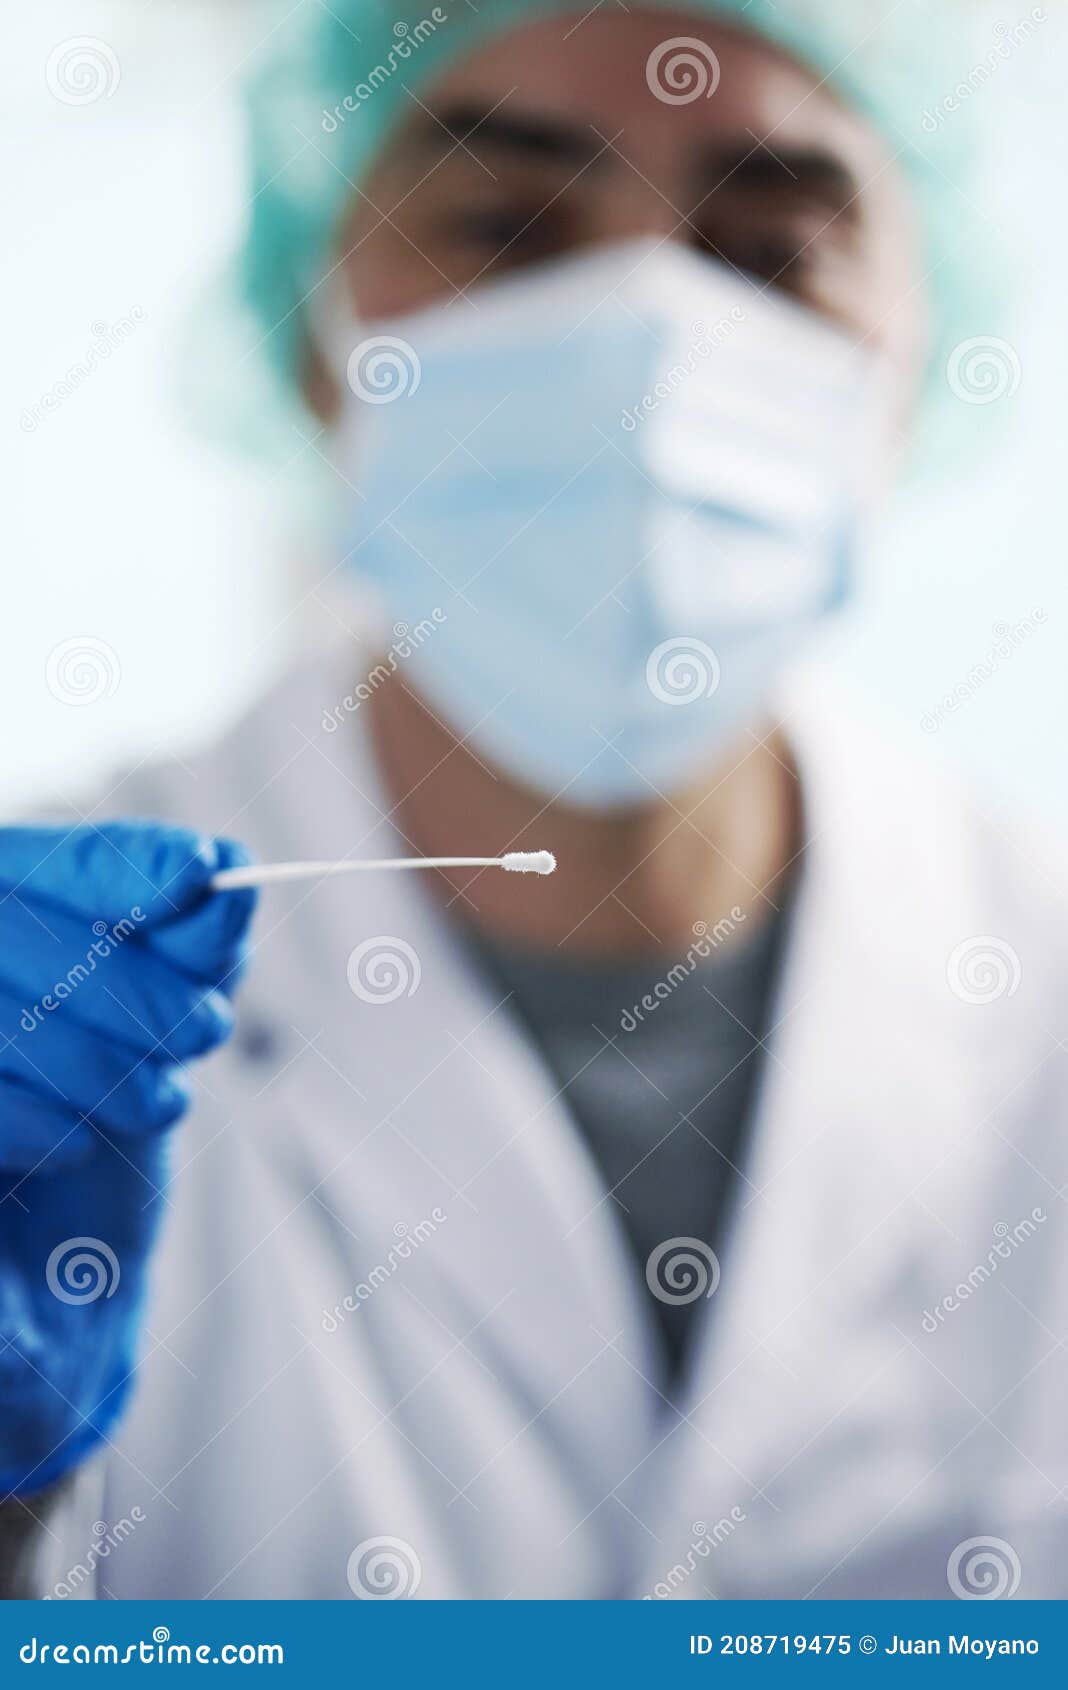 worker about to take a nasopharyngeal culture